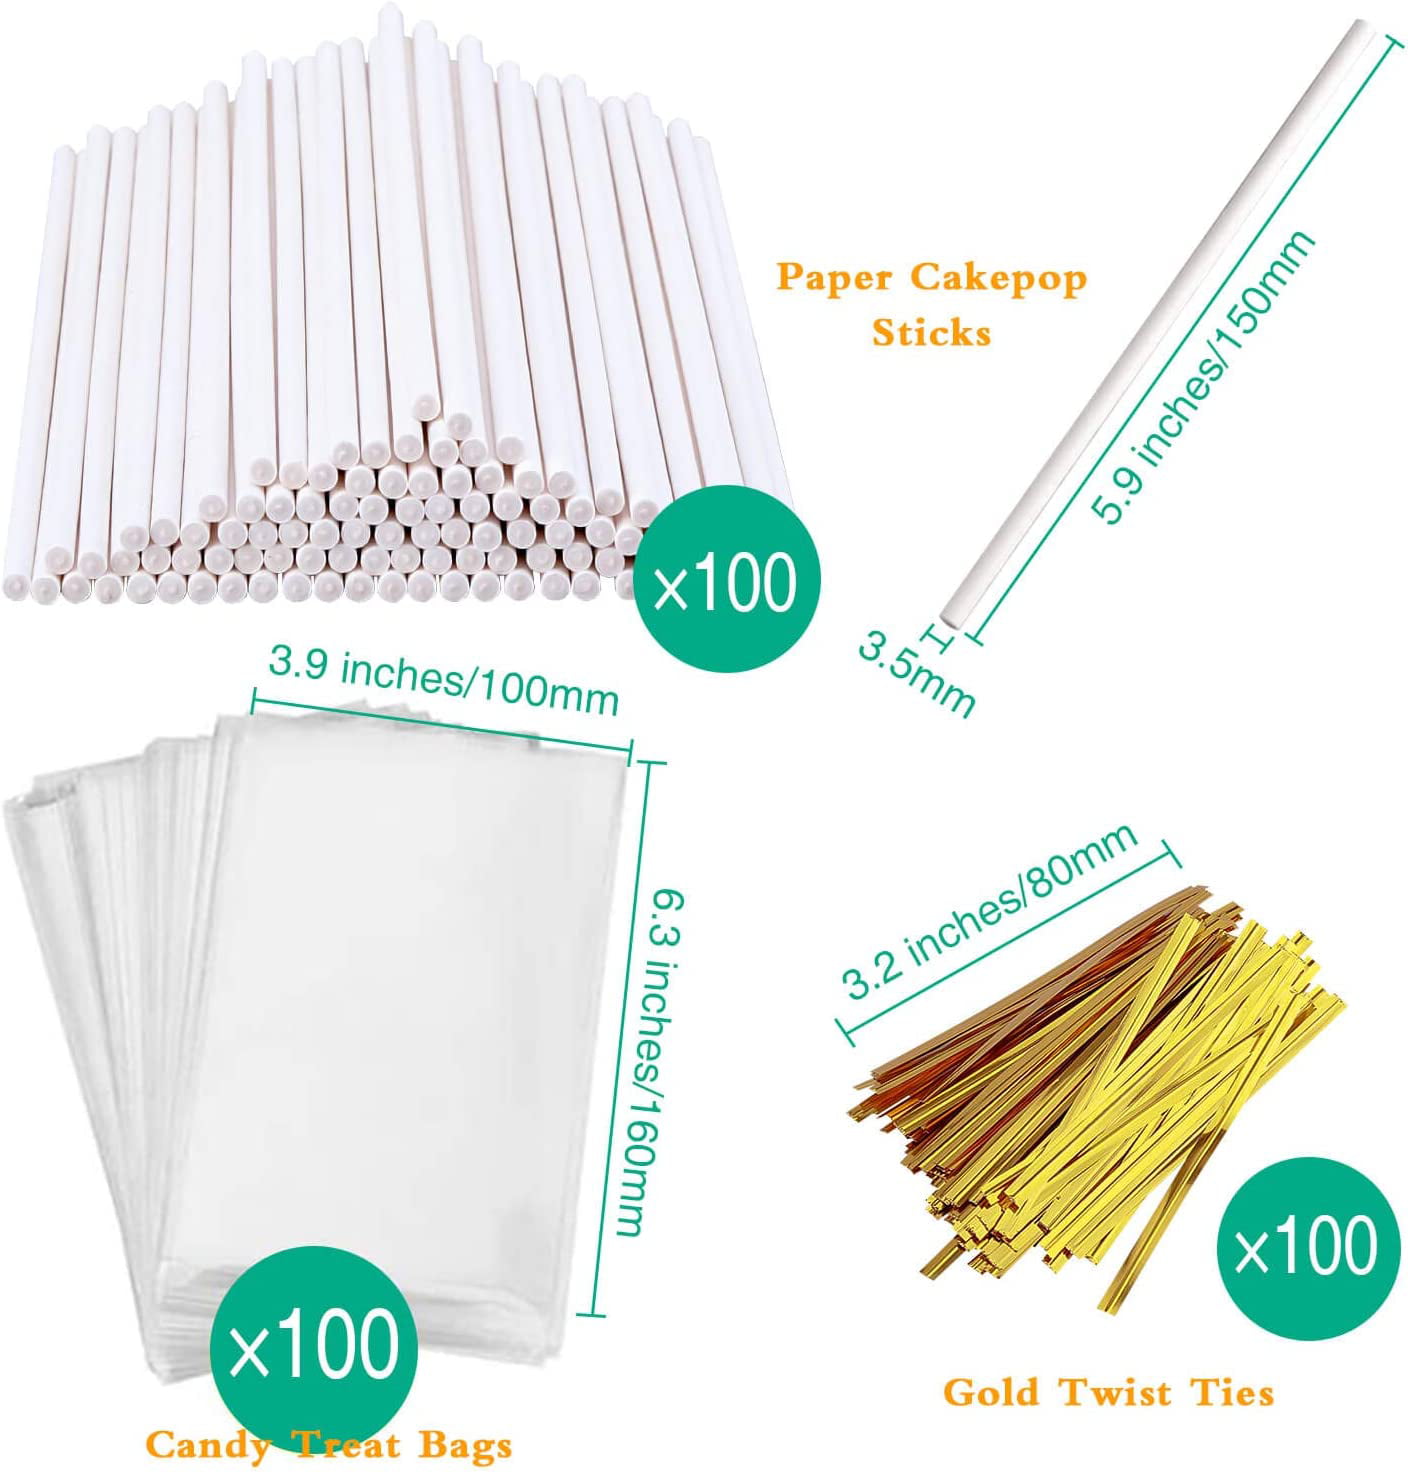 Cake Pop Sticks and Wrappers, Including 100 pcs 6-inch Paper Lollipop  Sticks, 100 pcs Iridescent Holographic Cellophane Bags, 100 pcs Gold Twist  Ties for Cakepop, Lollipop, Hard Candy,Chocolate - Yahoo Shopping